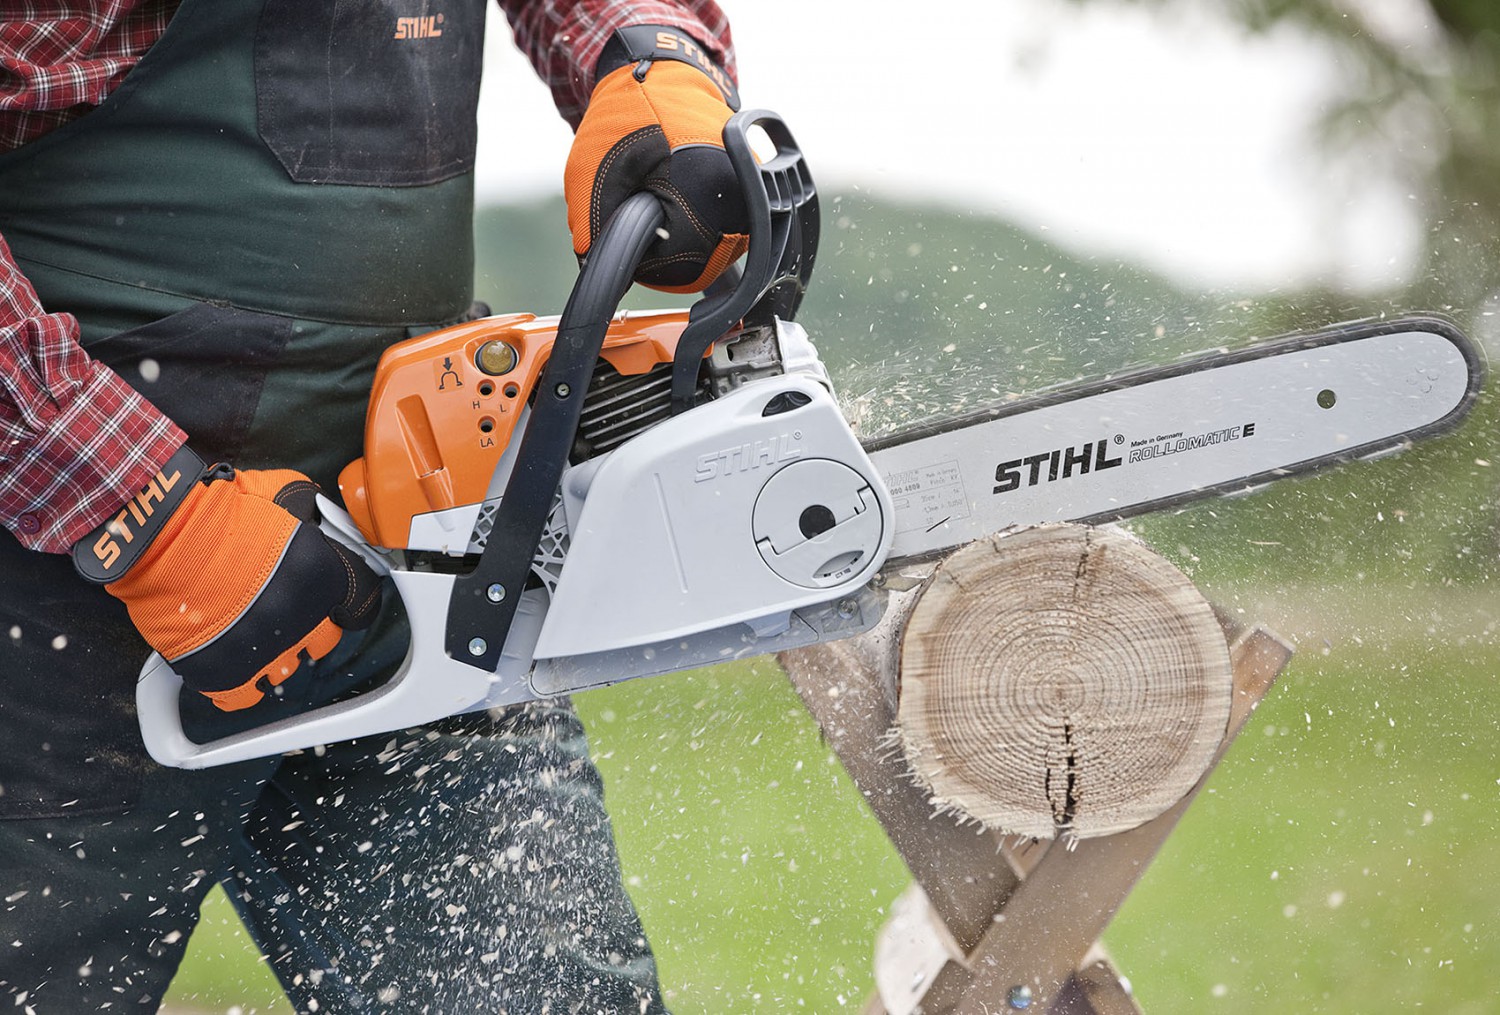 We test five chain saws in a battle for wood-slicing supremacy